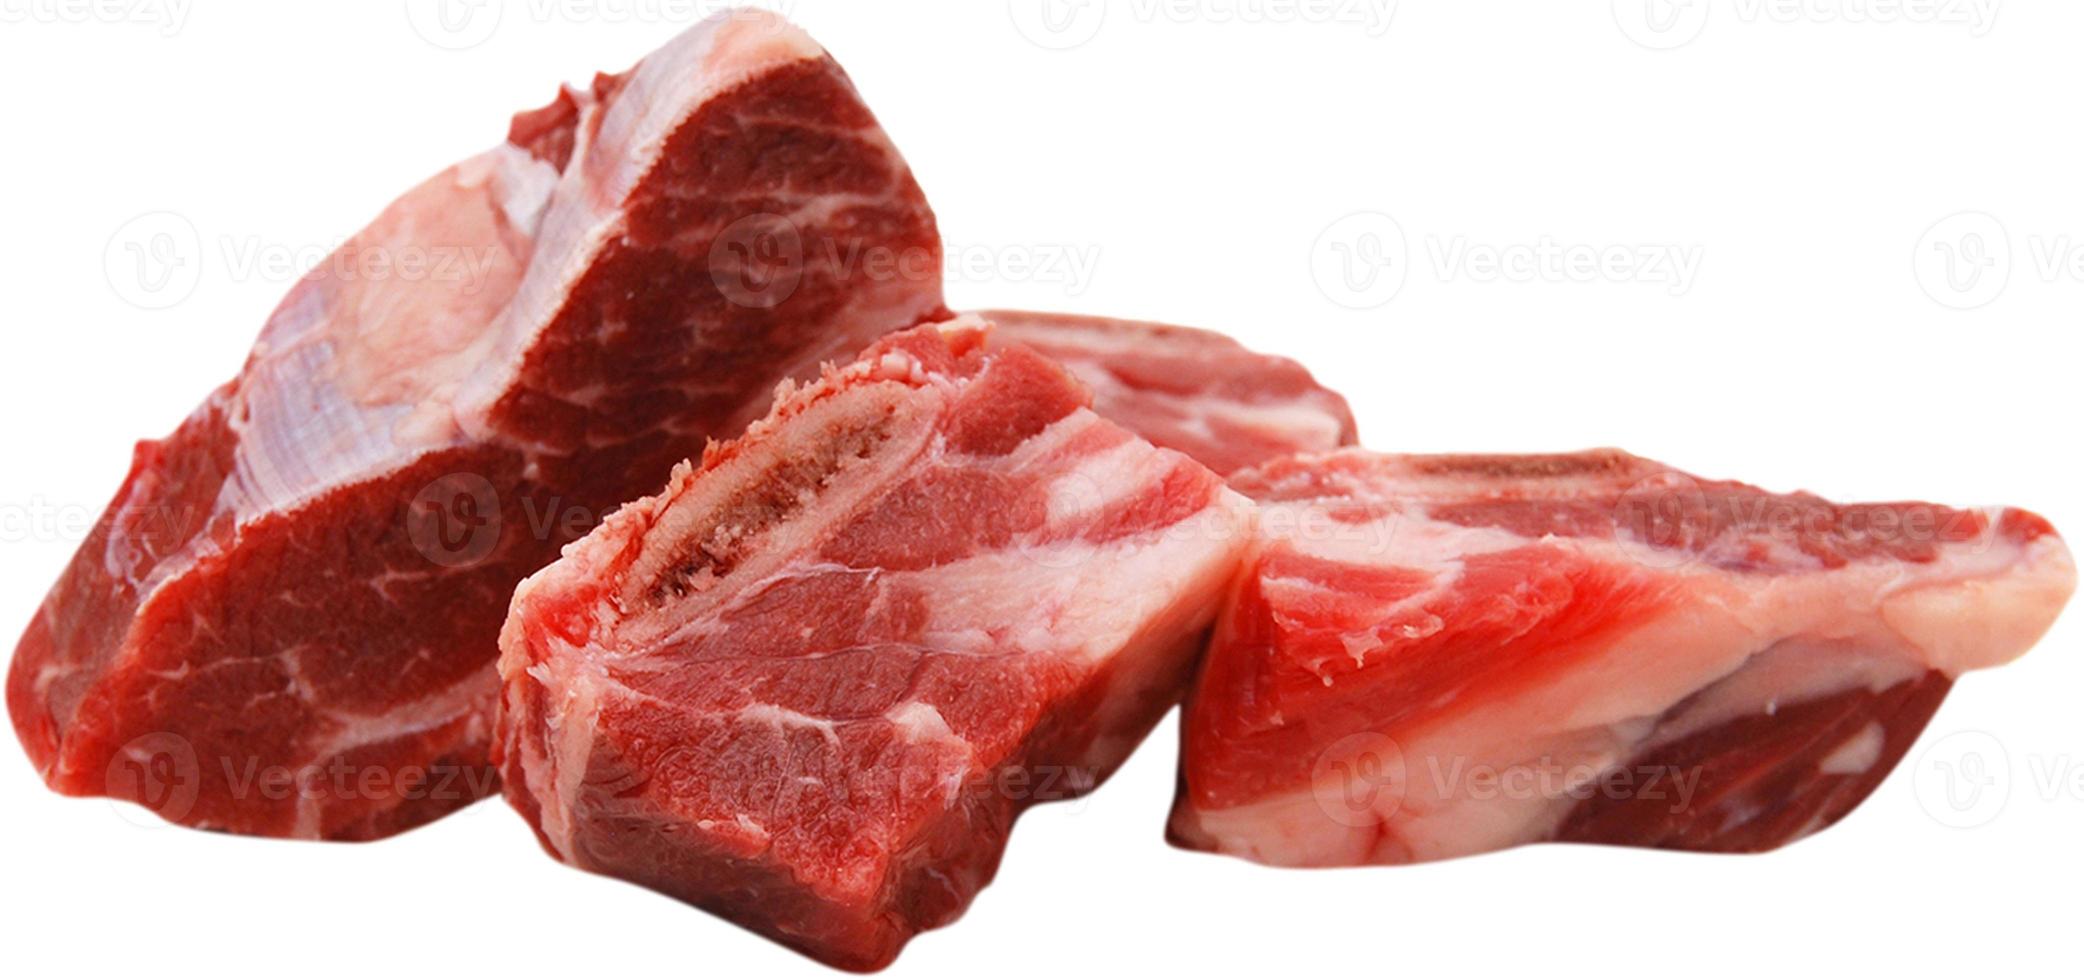 raw meat chilled, cutting isolated on white background photo